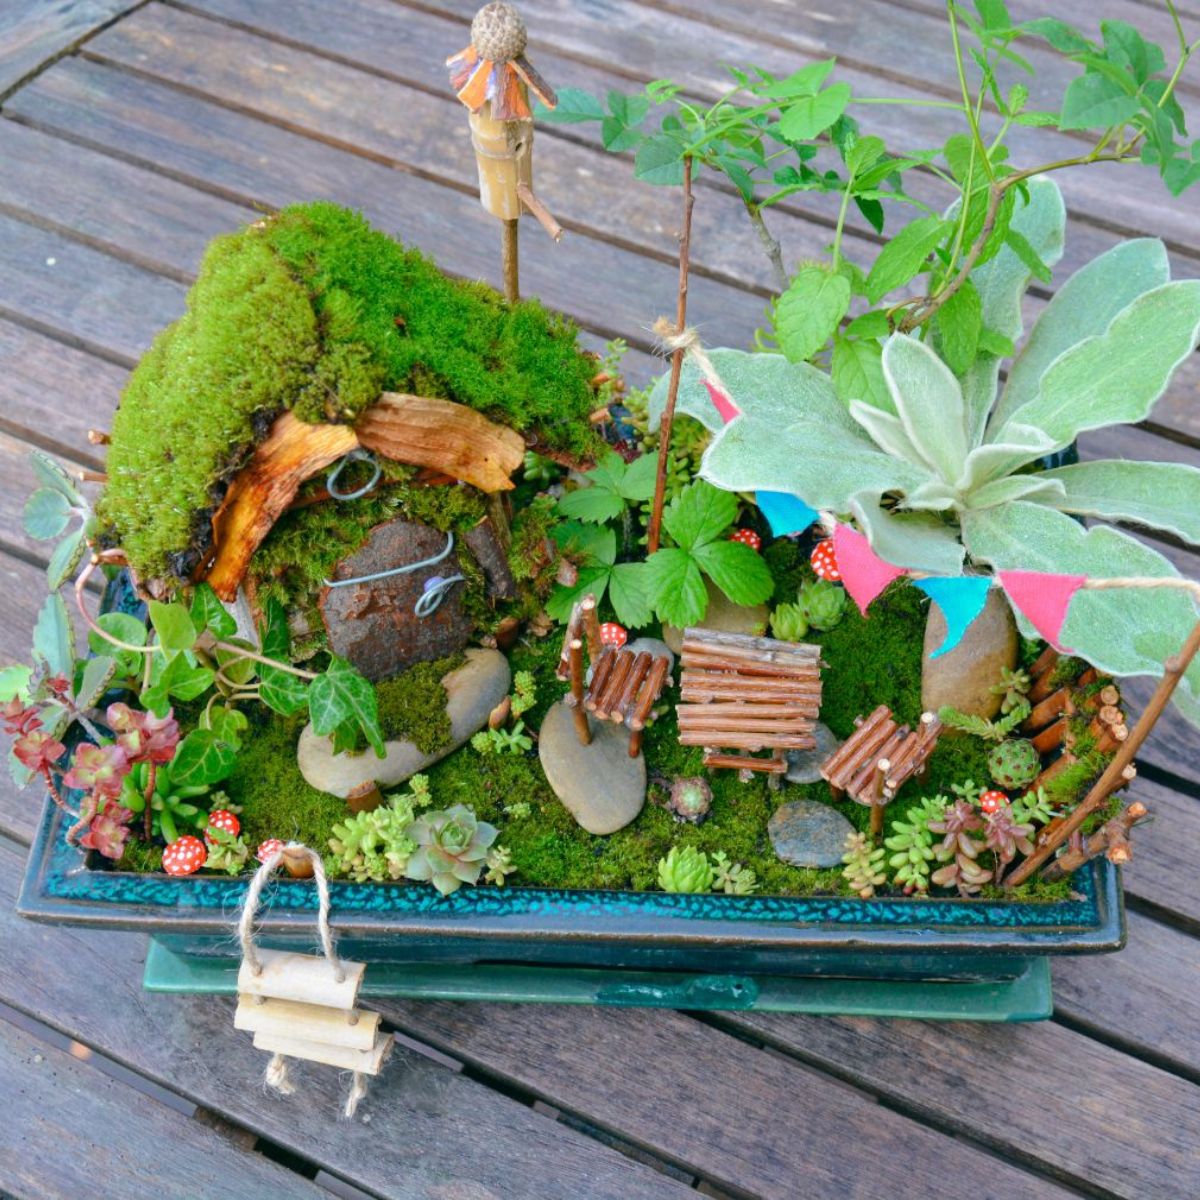 How to Grow an Indoor Potted Fairy Garden + 10 Tiny Plants for It